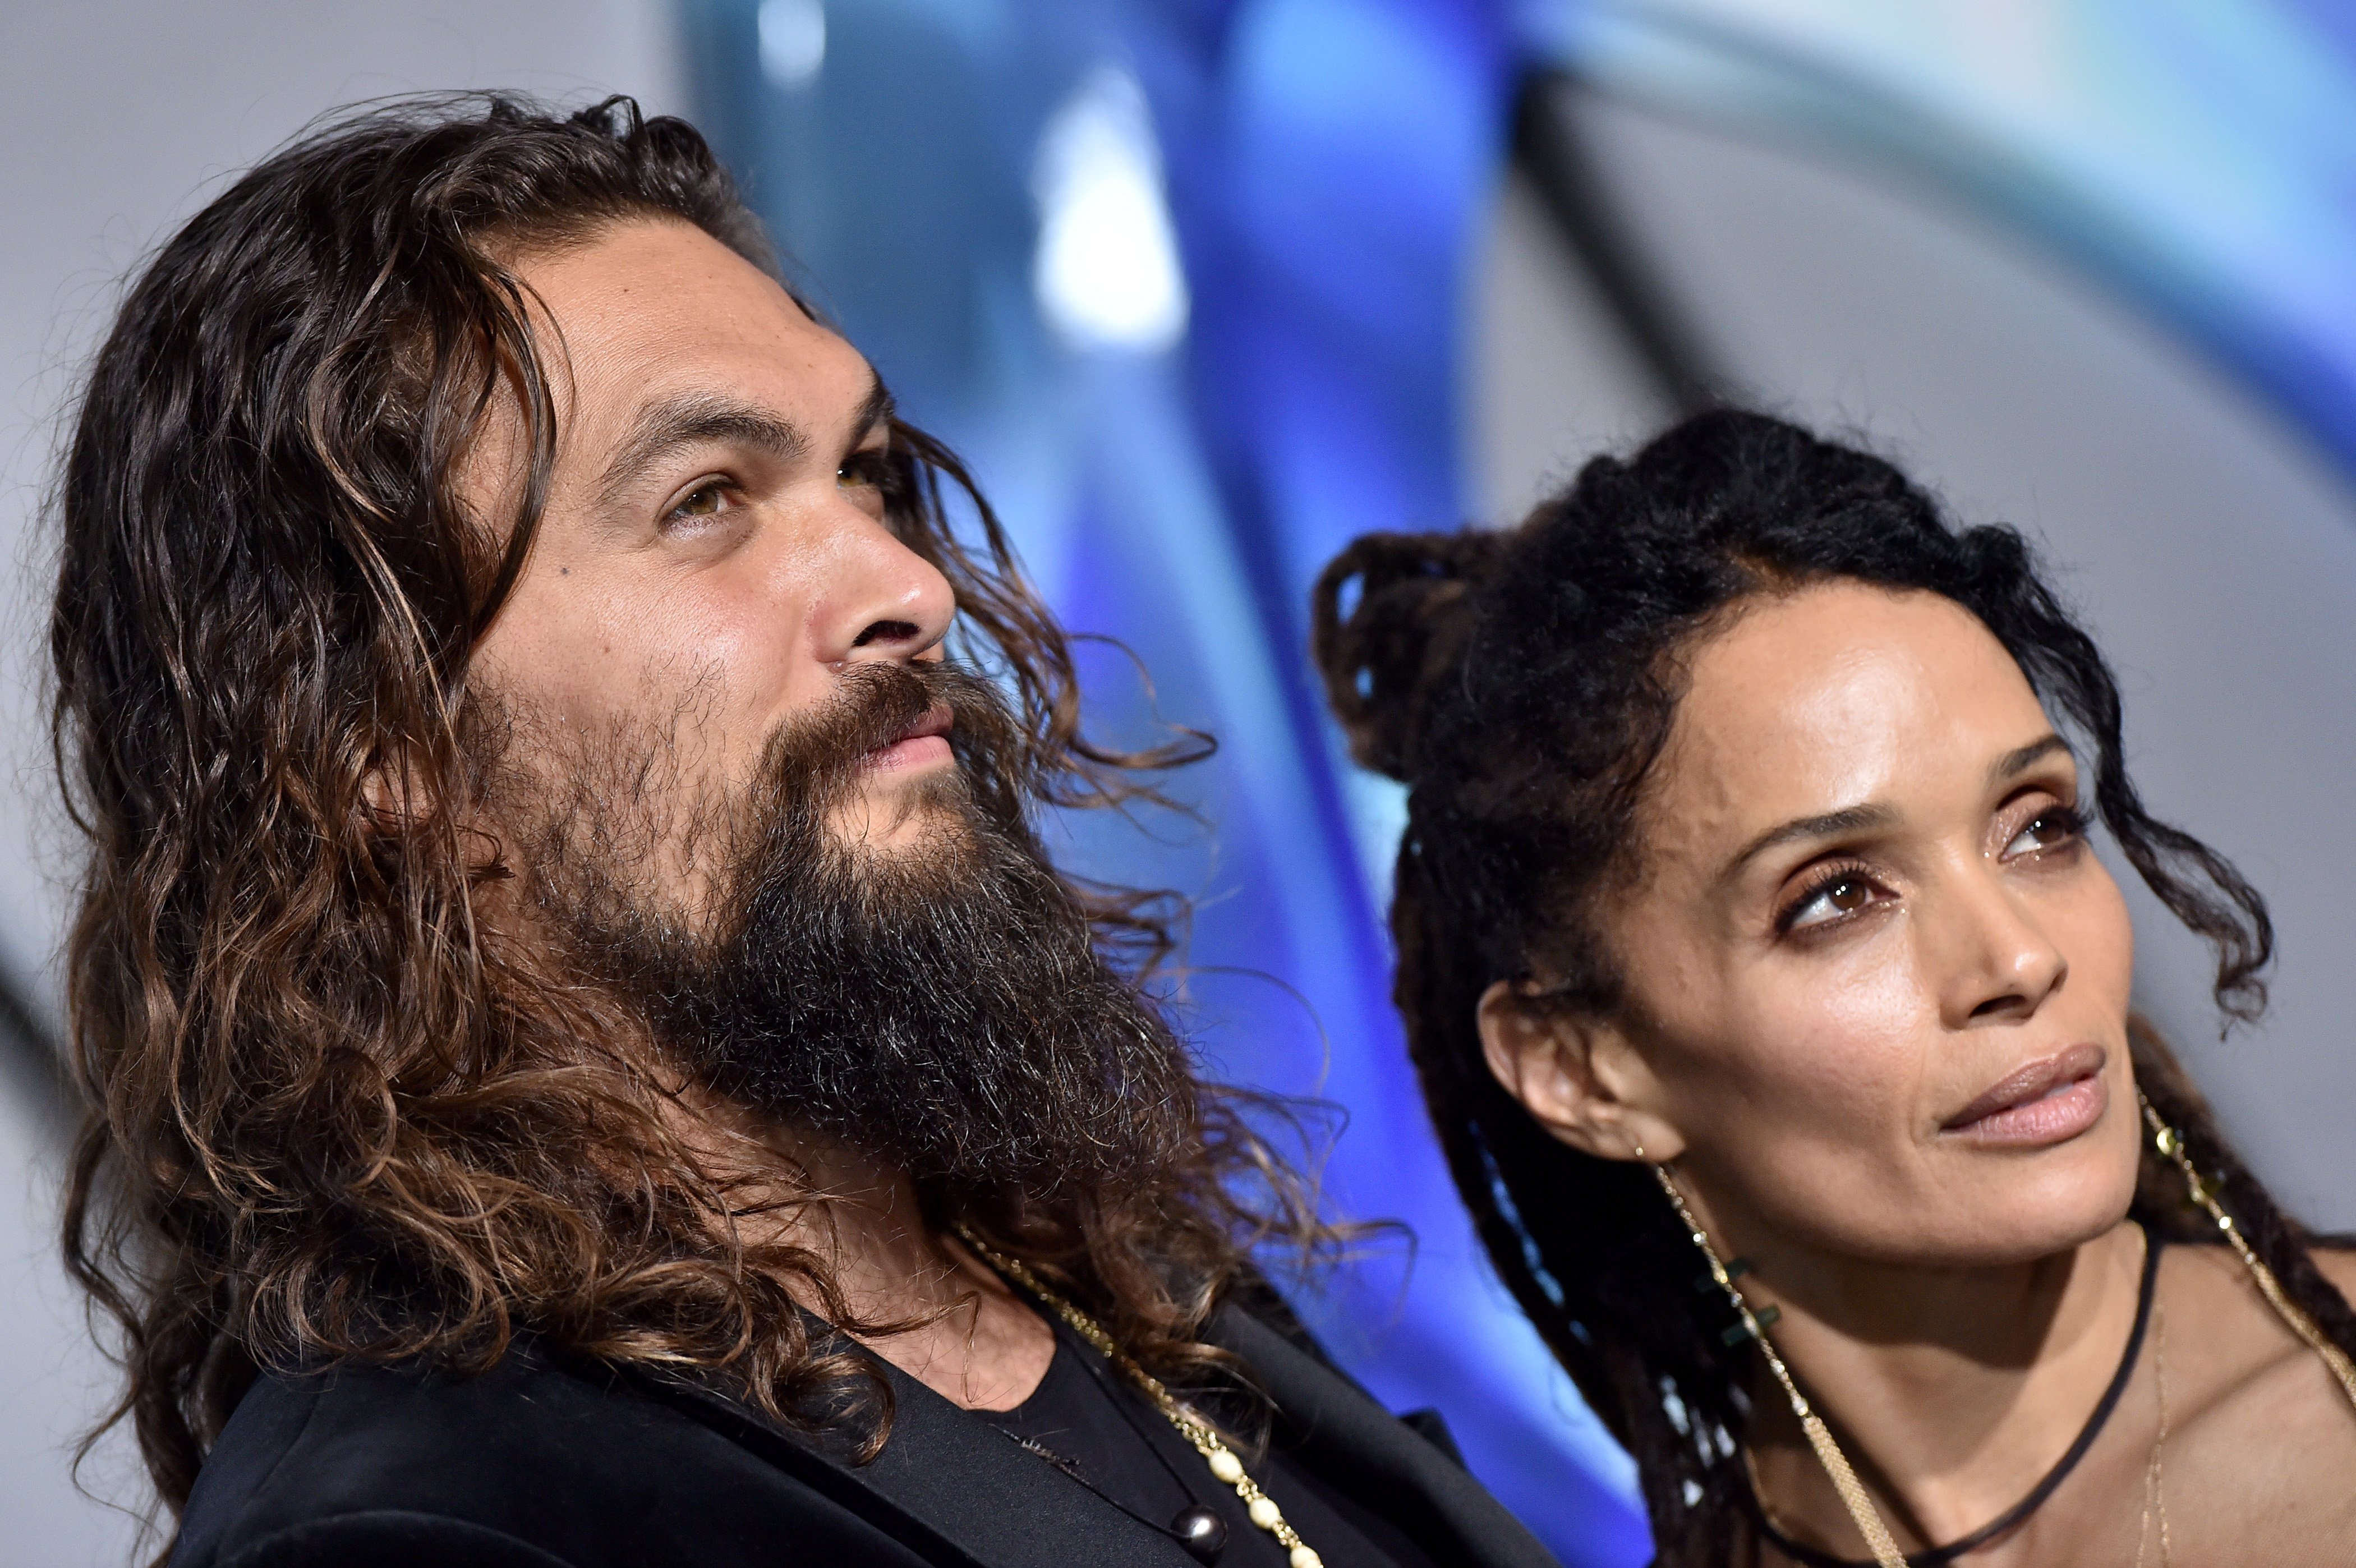 Filmmaker Jason Momoa and wife Lisa Bonet attend the premiere of "Aquaman" at TCL Chinese Theatre on December 12, 2018 in Hollywood, California. / Source: Getty Images